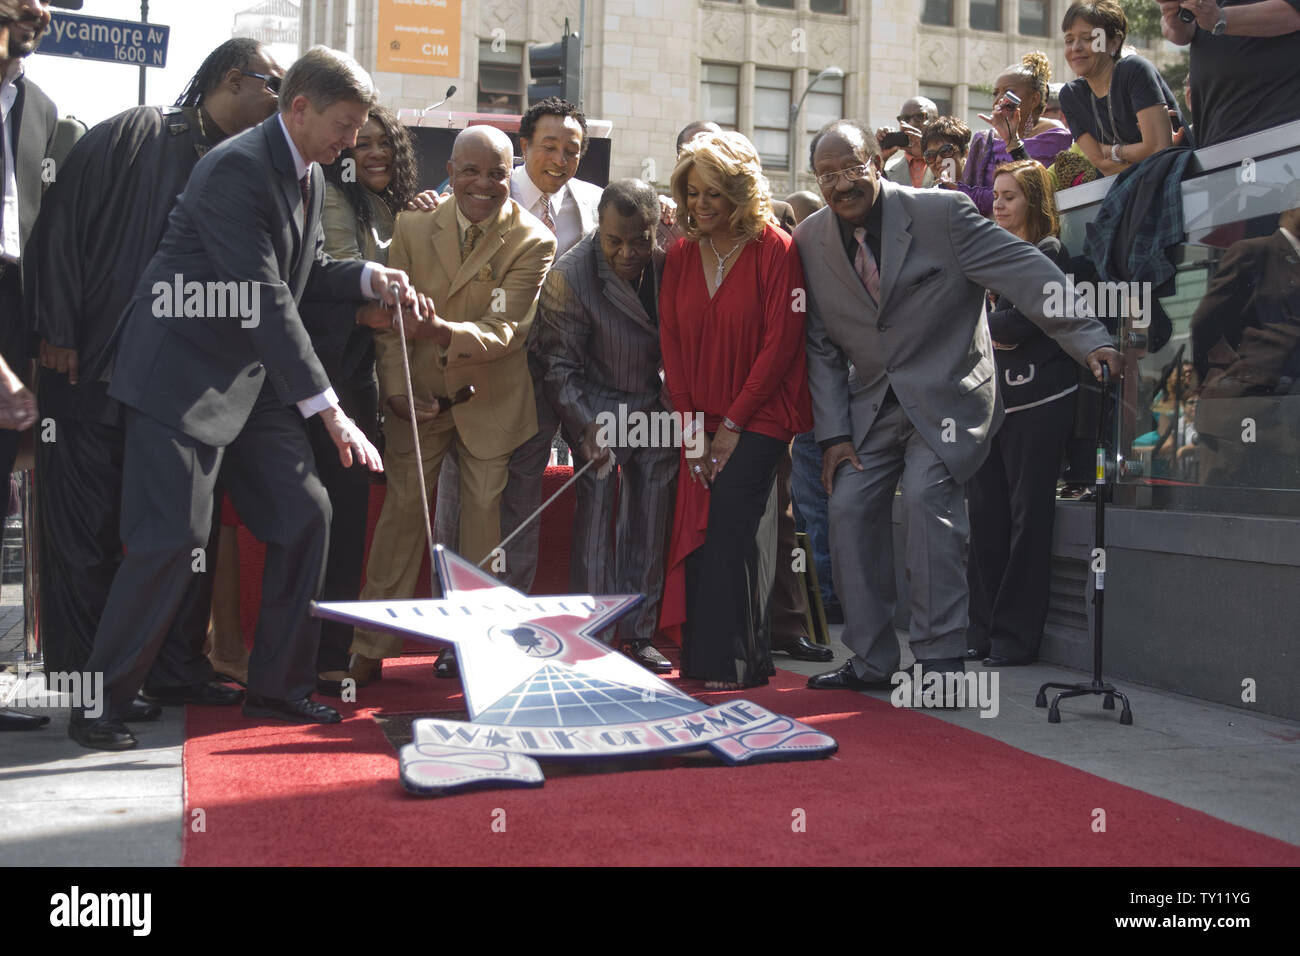 Celebrities and dignitaries (from L to R) Musician and Composer Stevie Wonder,The Hollywood Chamber of Commerce President Leron Gubler, the wife of late Ronnie White, Gloria White, Record Produder Berry Gordy and members of the group 'The Miracles' William 'Smokey Robinson',  Warren 'Pete' Moore, Claudette Robinson and Bobby Rogers unveiled their  Star on the Hollywood Walk of Fame in Hollywood, California on March 20, 2009.  (UPI Photo/Hector Mata) Stock Photo